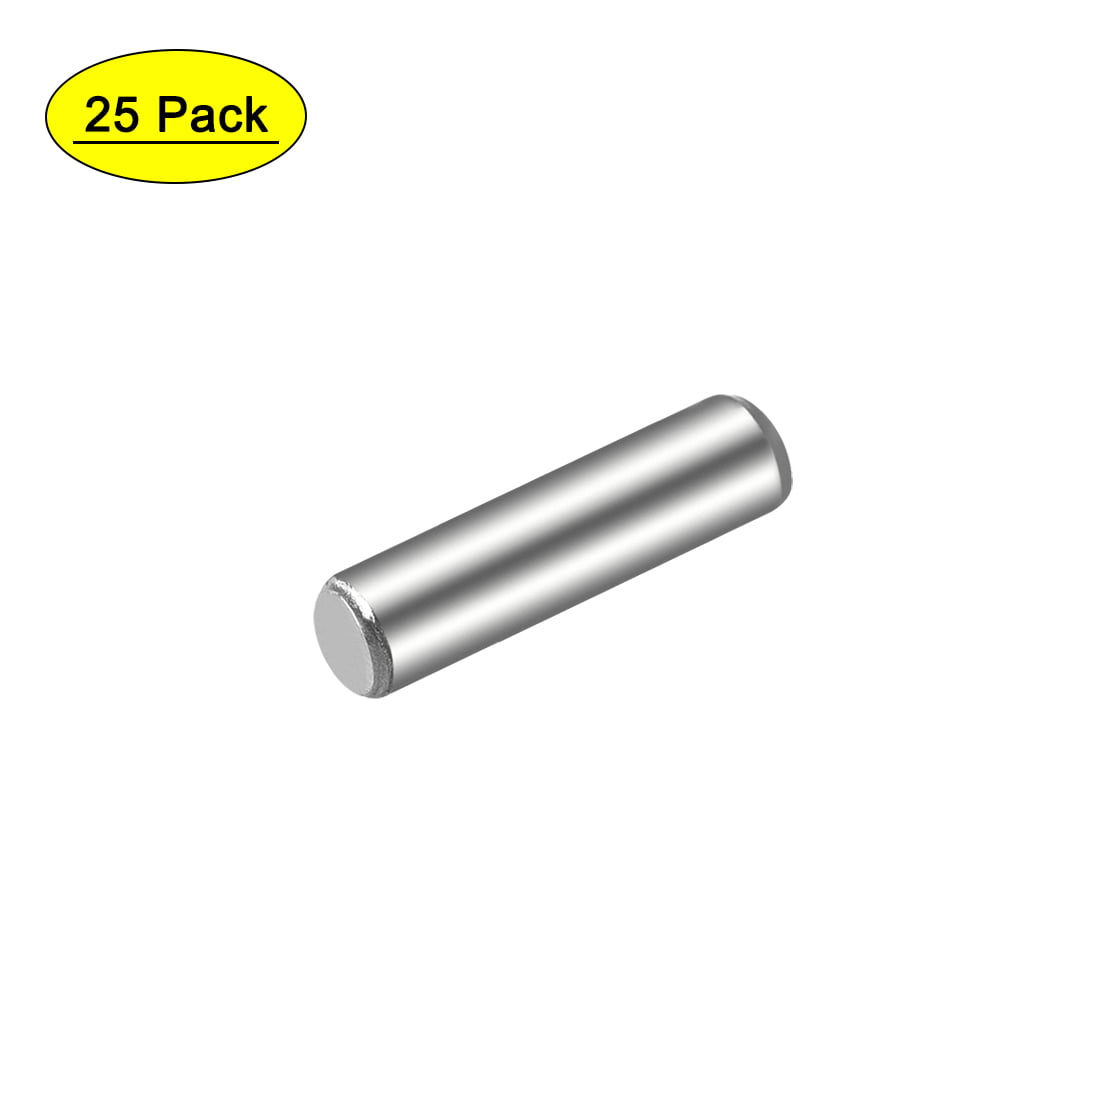 Details about   15Pcs 2mm x 10mm Dowel Pin 304 Stainless Steel Shelf Support Pin Fasten 